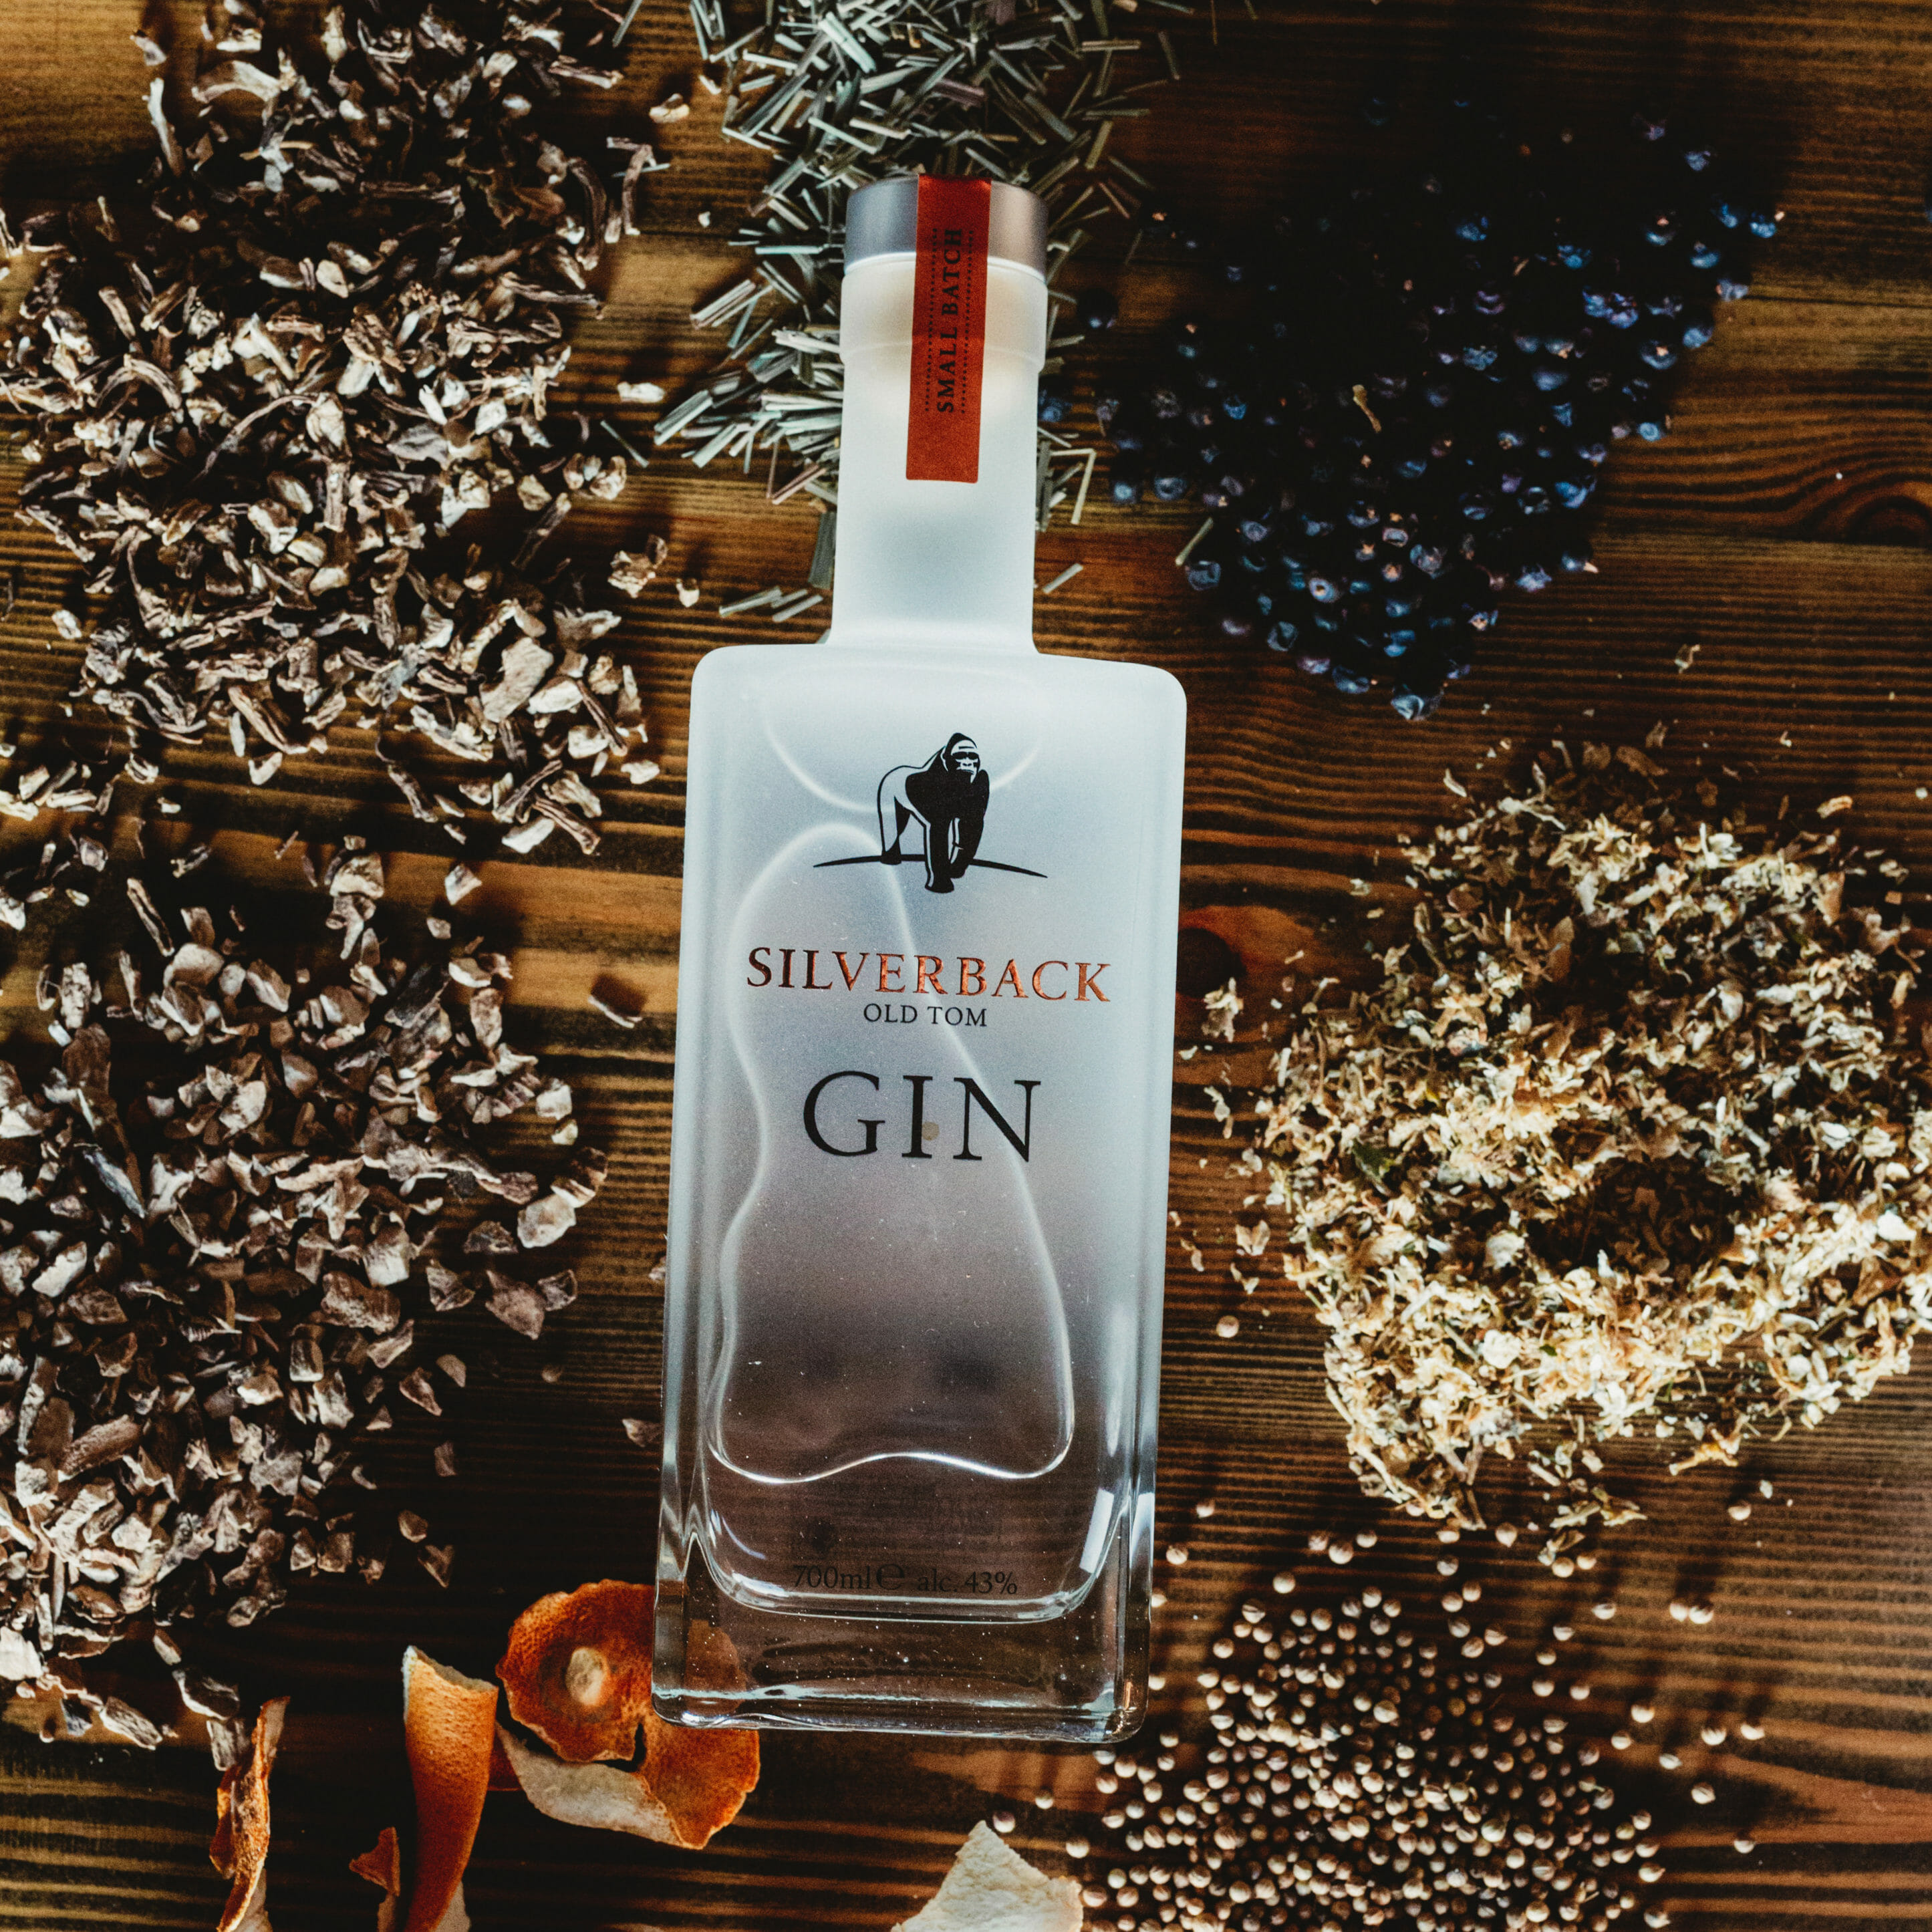 Silverback Old Tom Gin surrounded by botanicals such as coriander, juniper berries, orange peel, and angelica root used to craft the spirit - Gorilla Spirits Co.